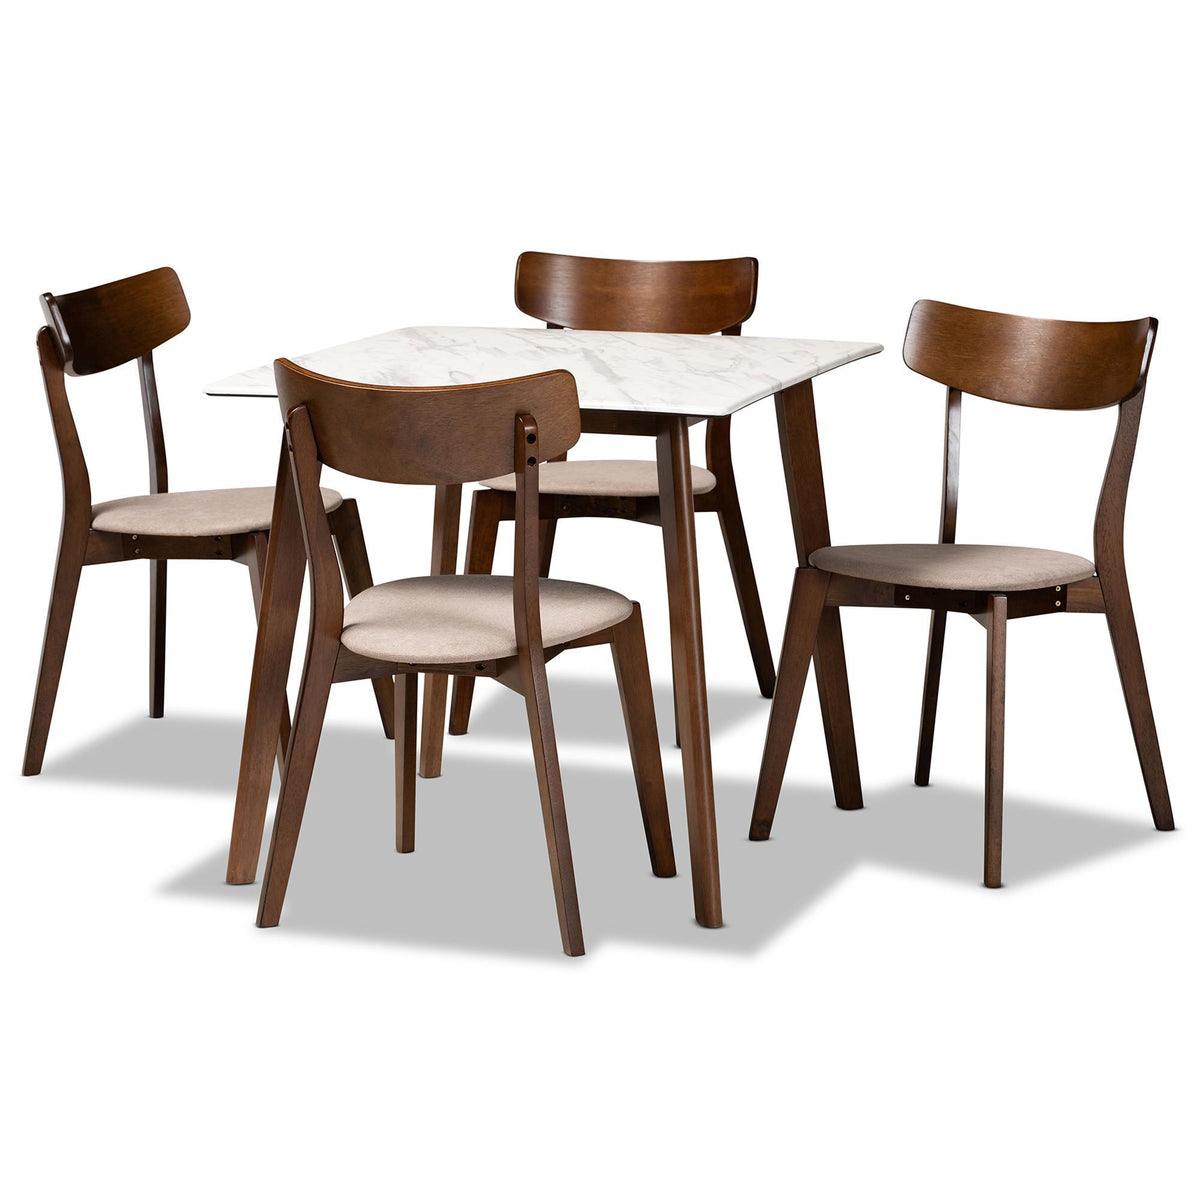 Baxton Studio Reba Mid-Century Modern Light Beige Fabric Upholstered And Walnut Brown Finished Wood 5-Piece Dining Set With Faux Marble Dining Table - Reba-Latte/Walnut-5PC Dining Set